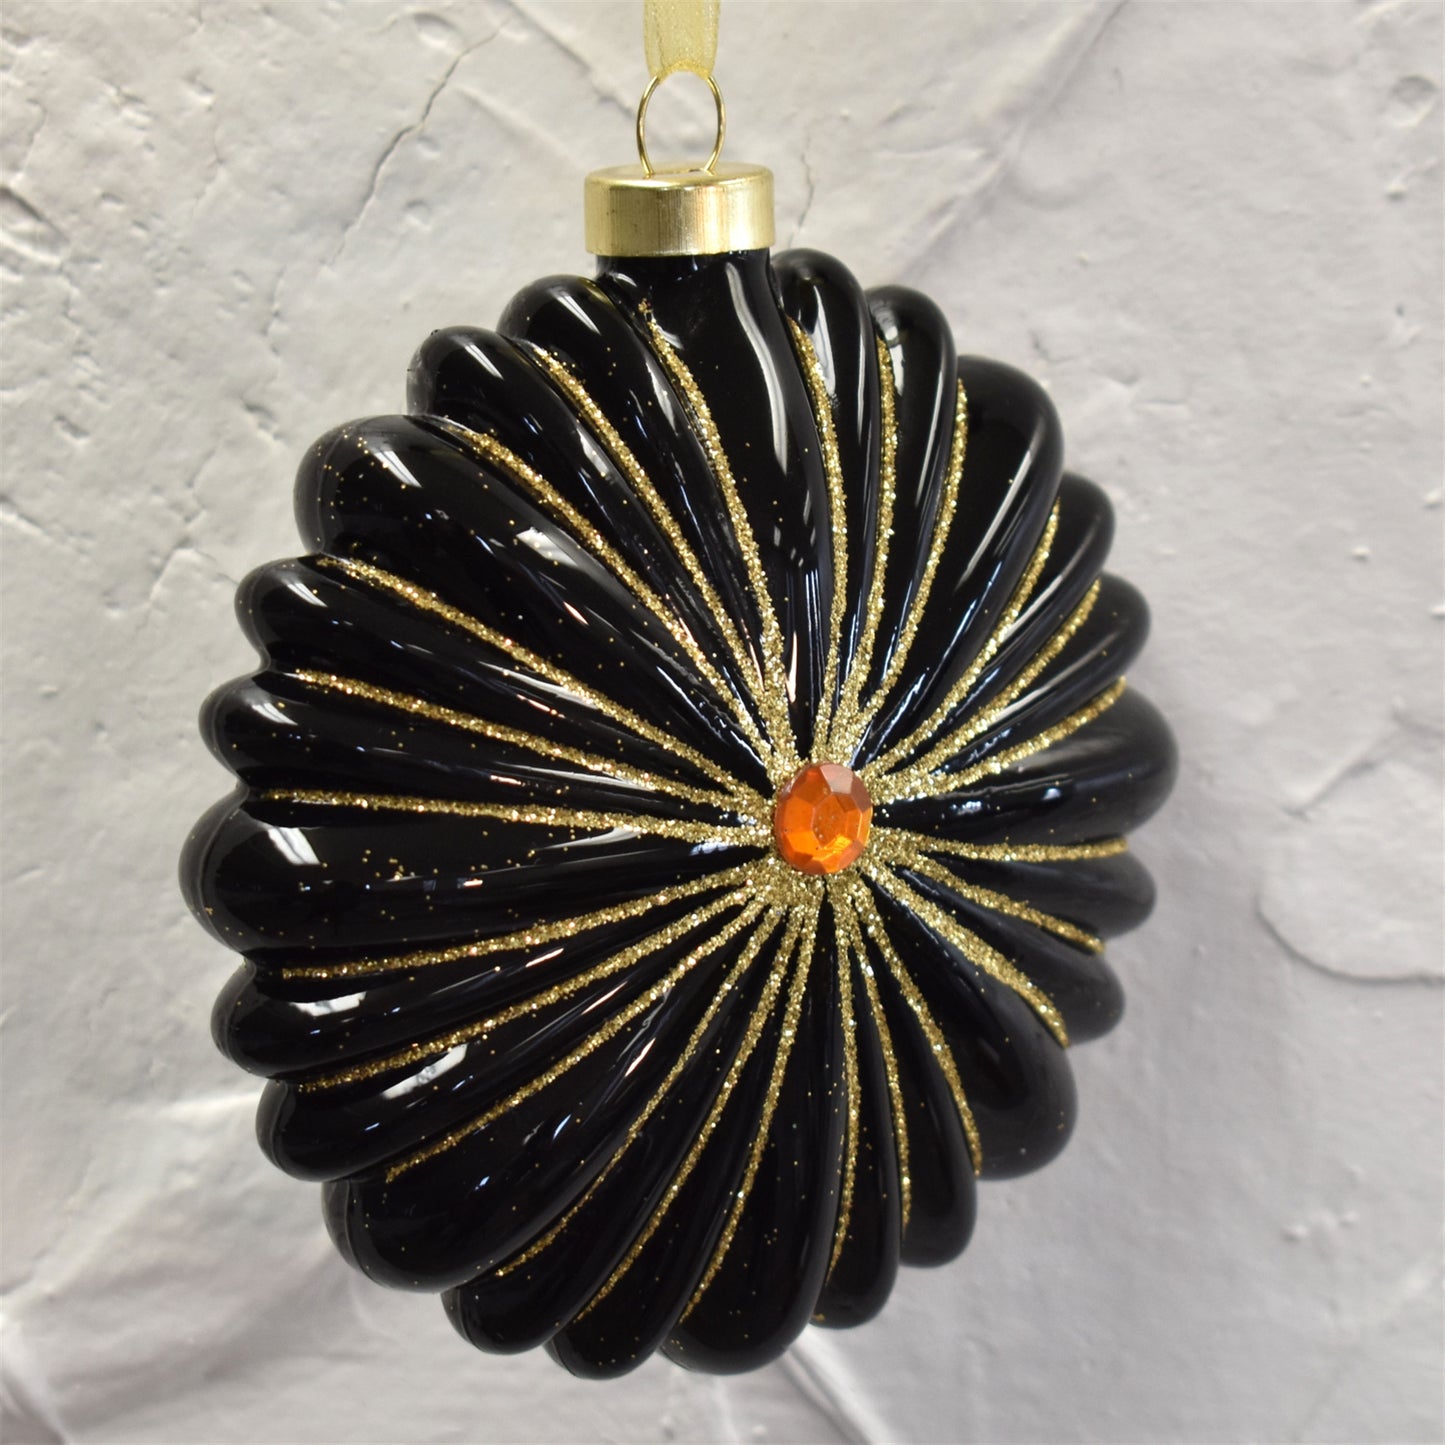 Iridescent Glass Ribbed and Glittered Disk Ornament 4" x 4.5" in Black/Gold | LCC22